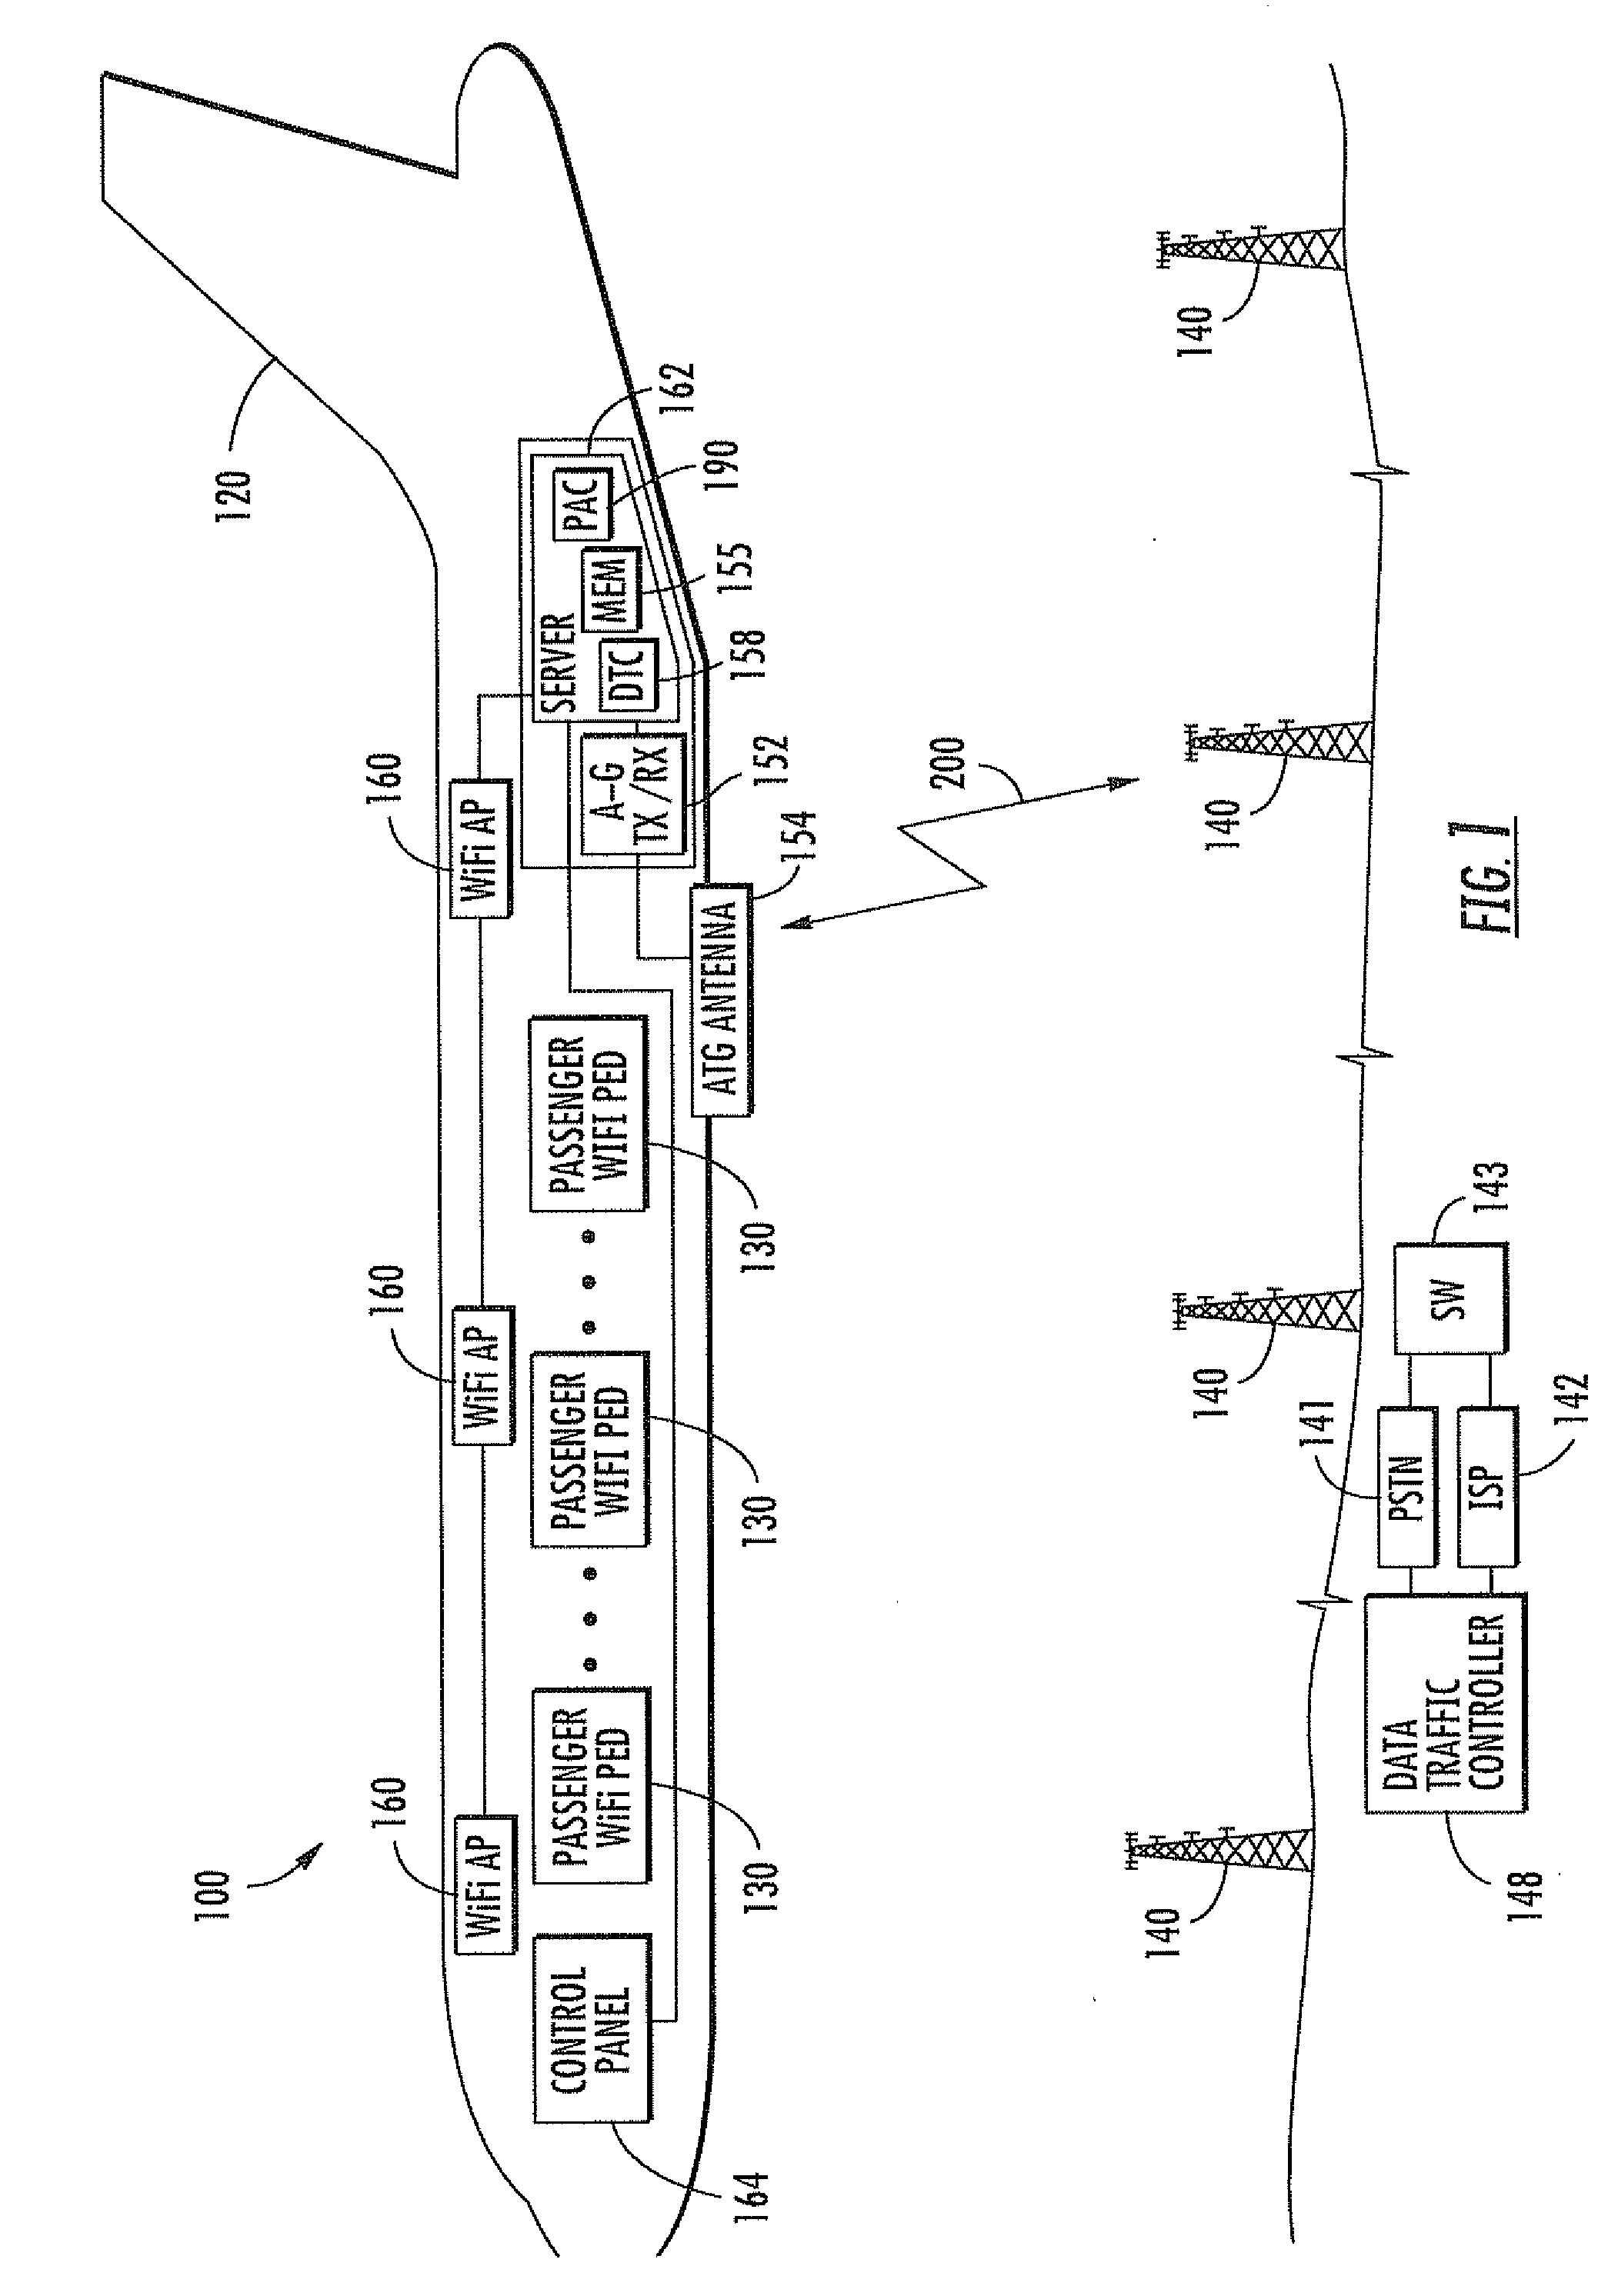 Aircraft in-flight entertainment system having a dual-beam antenna and associated methods